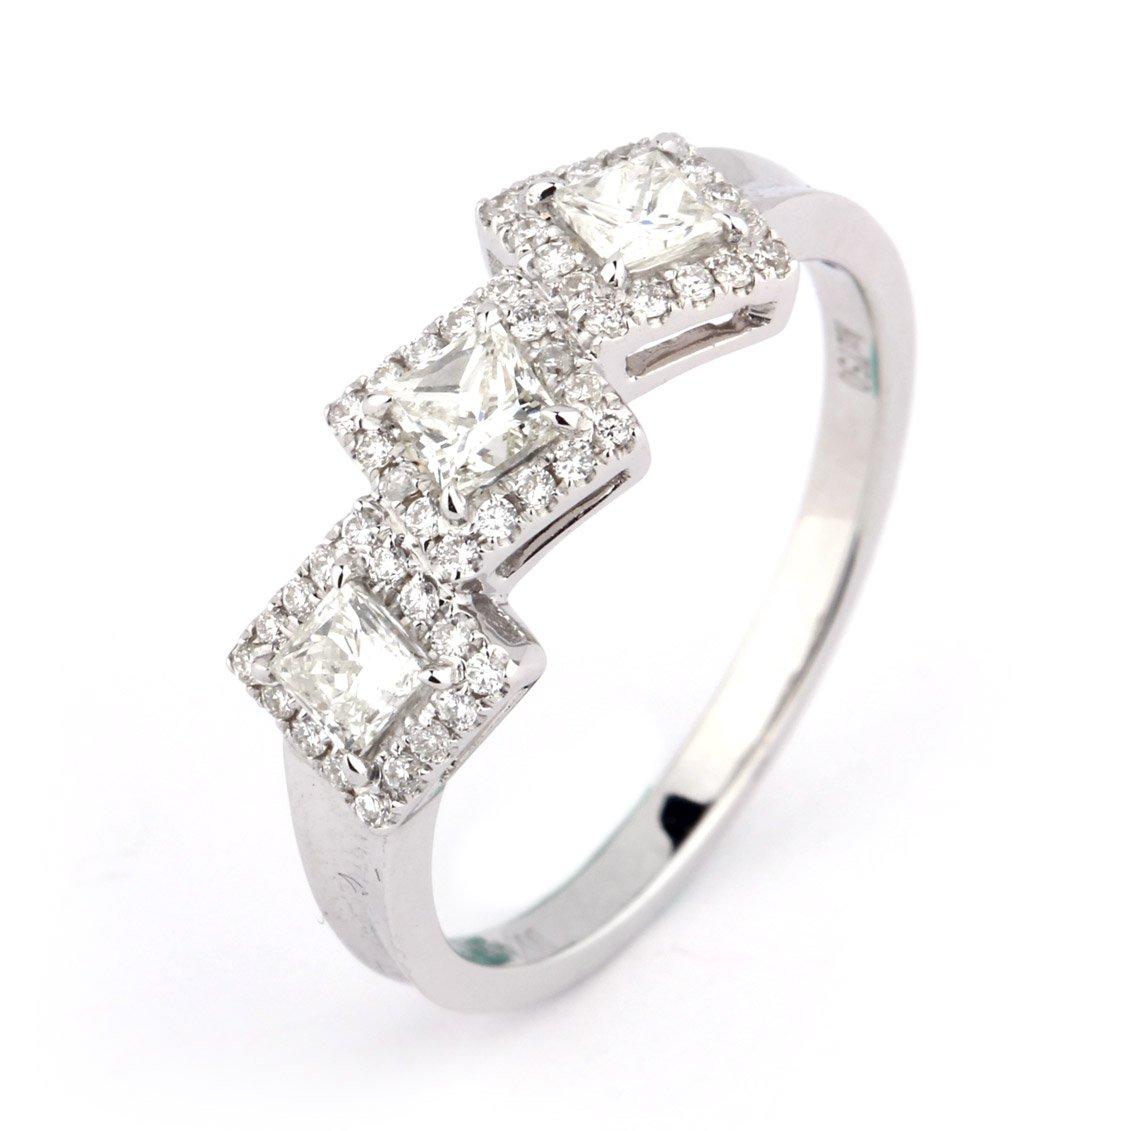 This Beautiful piece consists of three main princess shape diamonds, surrounded by smaller natural white diamonds. Making up a total of 0.60 Carats. Expertly crafted using 18 Karat White gold. Contemporary style, perfect for everyday wear or